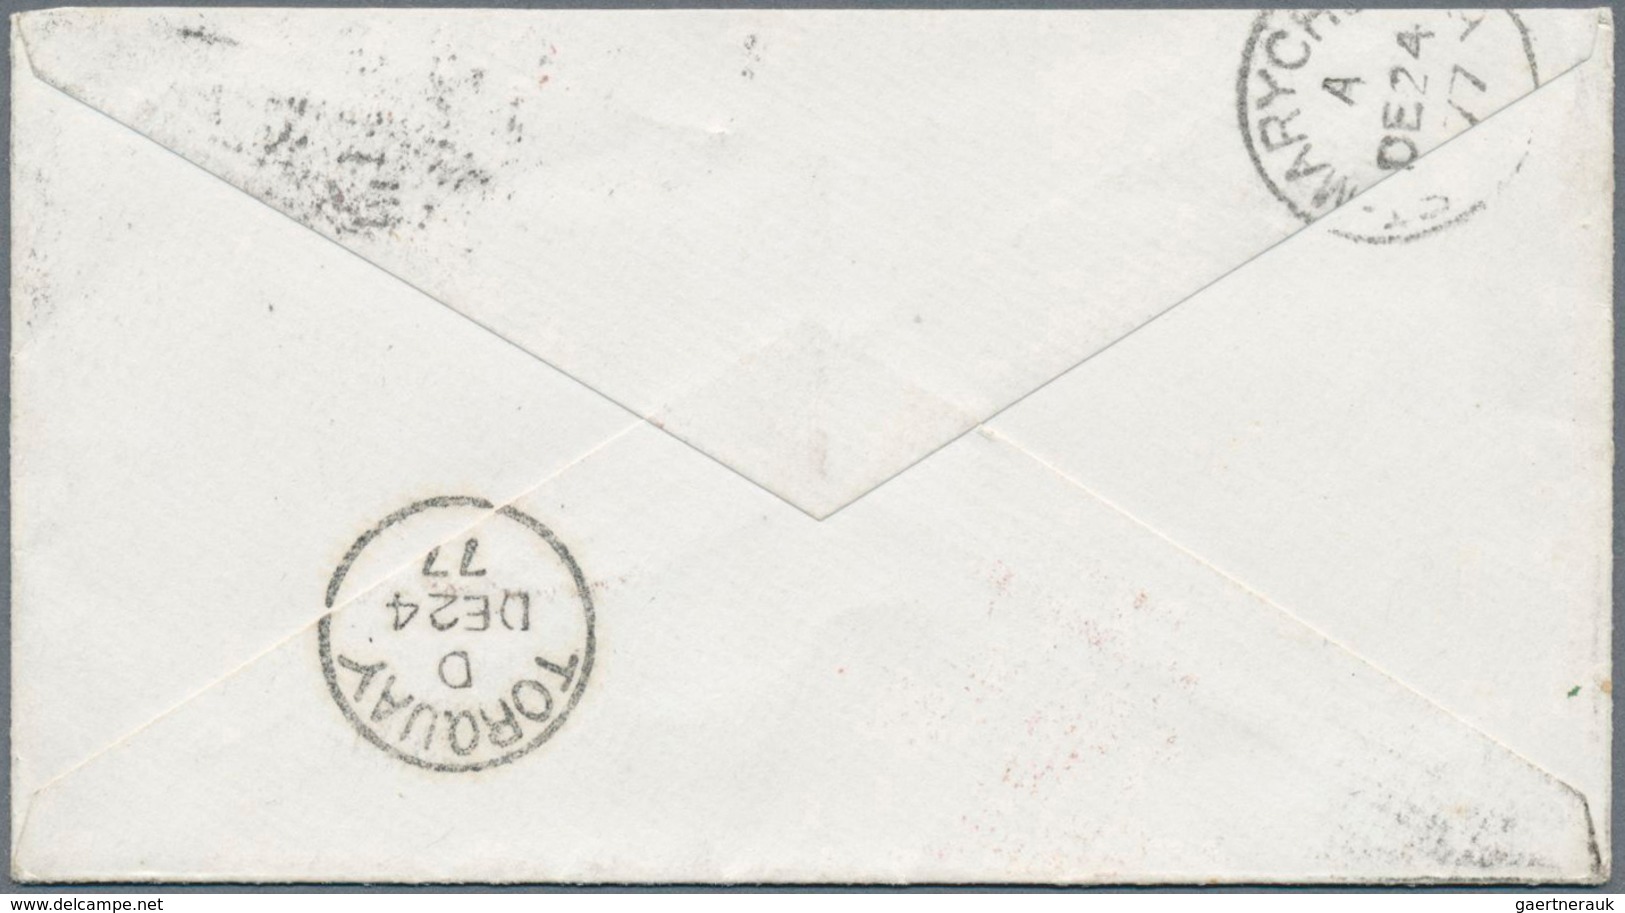 Malaiische Staaten - Penang: 1877 Cover To Torquay, England Via Southampton Franked By Straits Settl - Penang